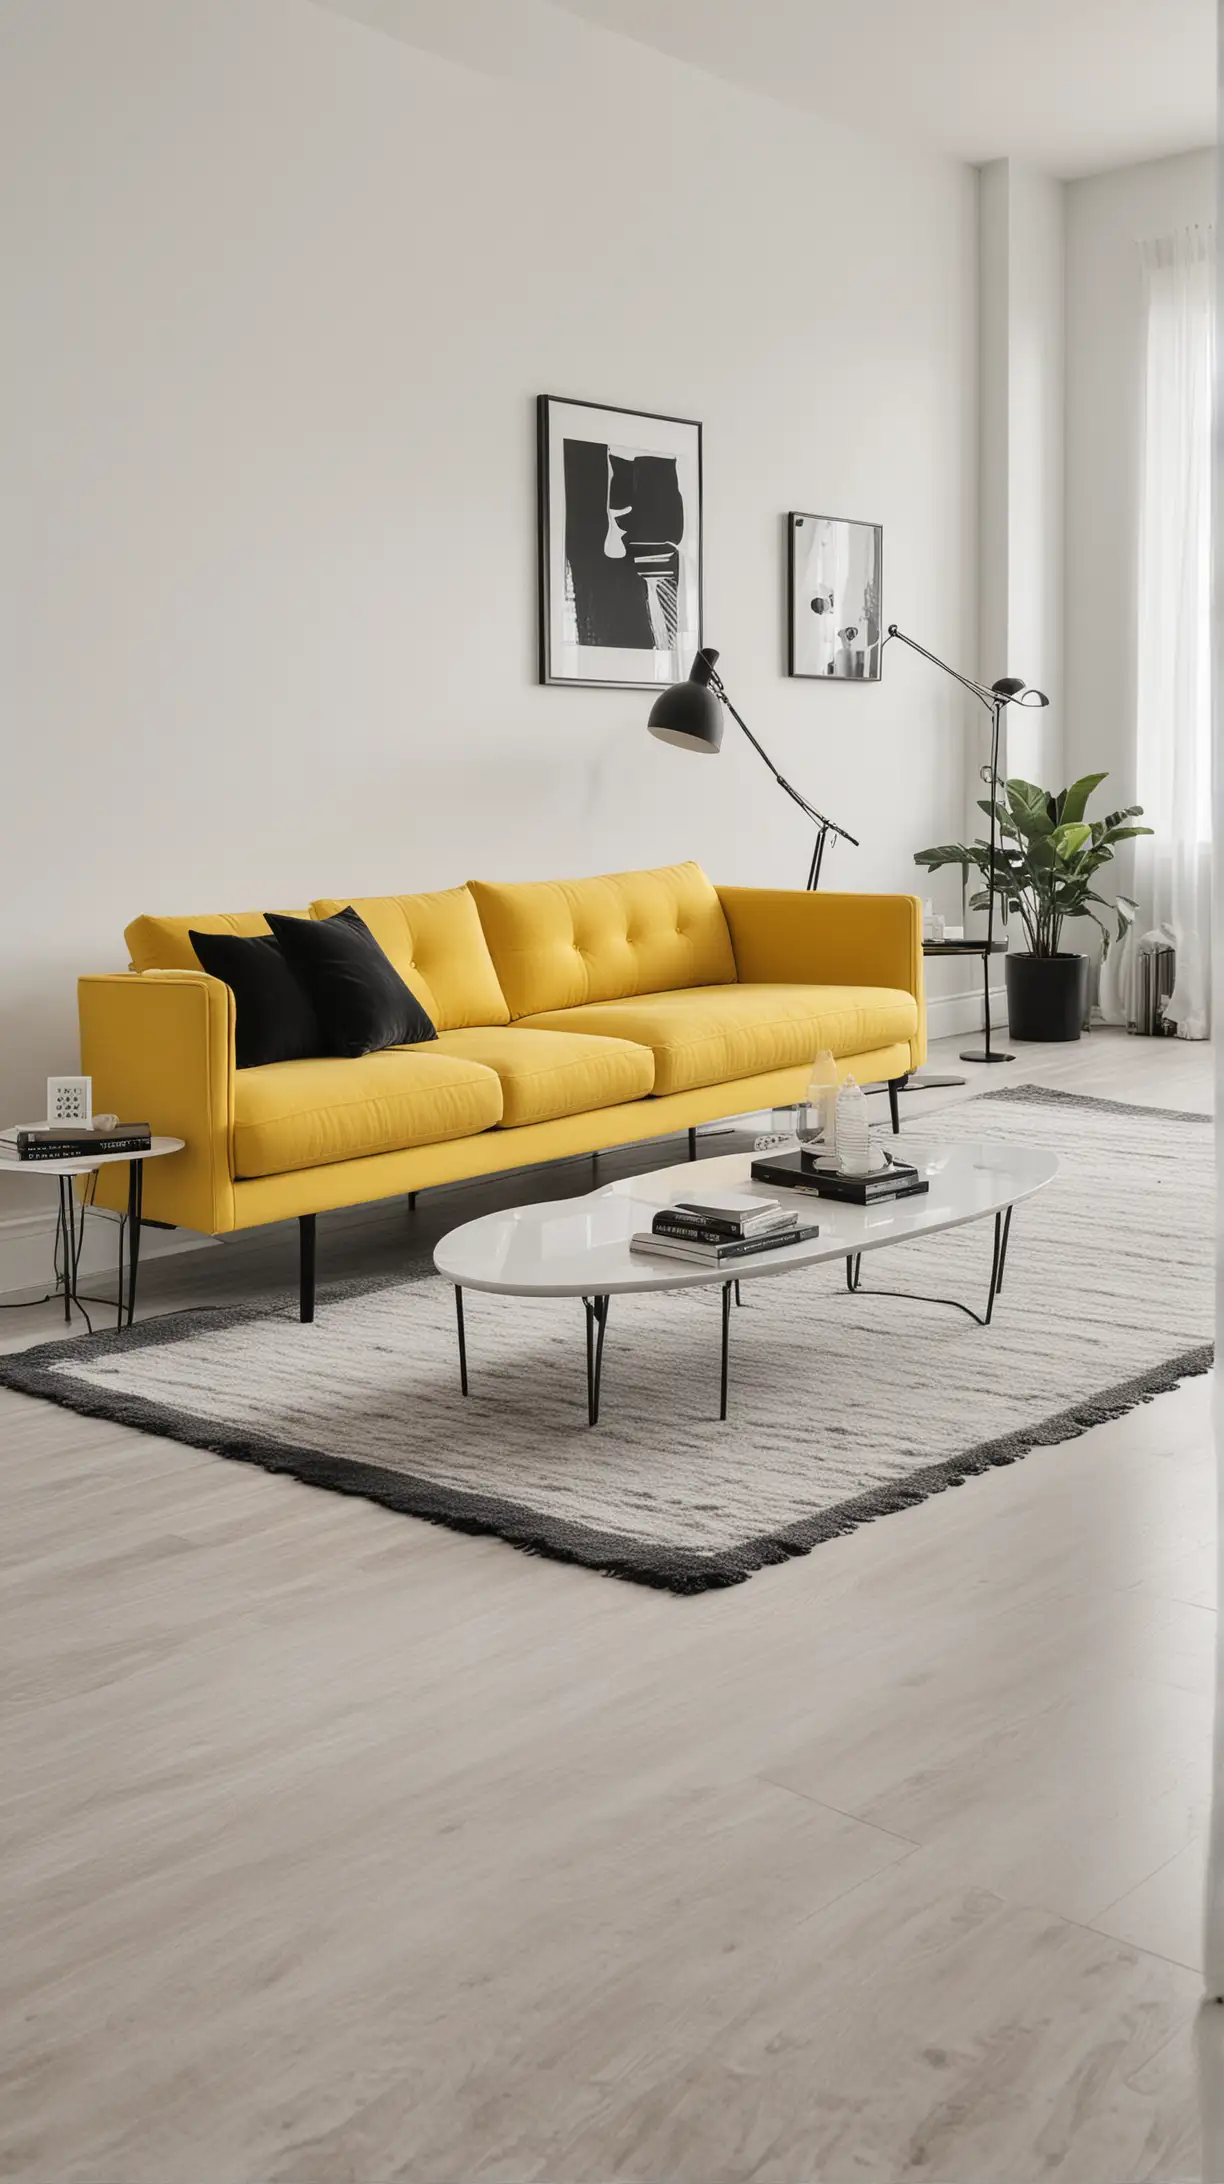 Modern Minimalist Living Room with Bright Yellow Couch and Sleek Furniture